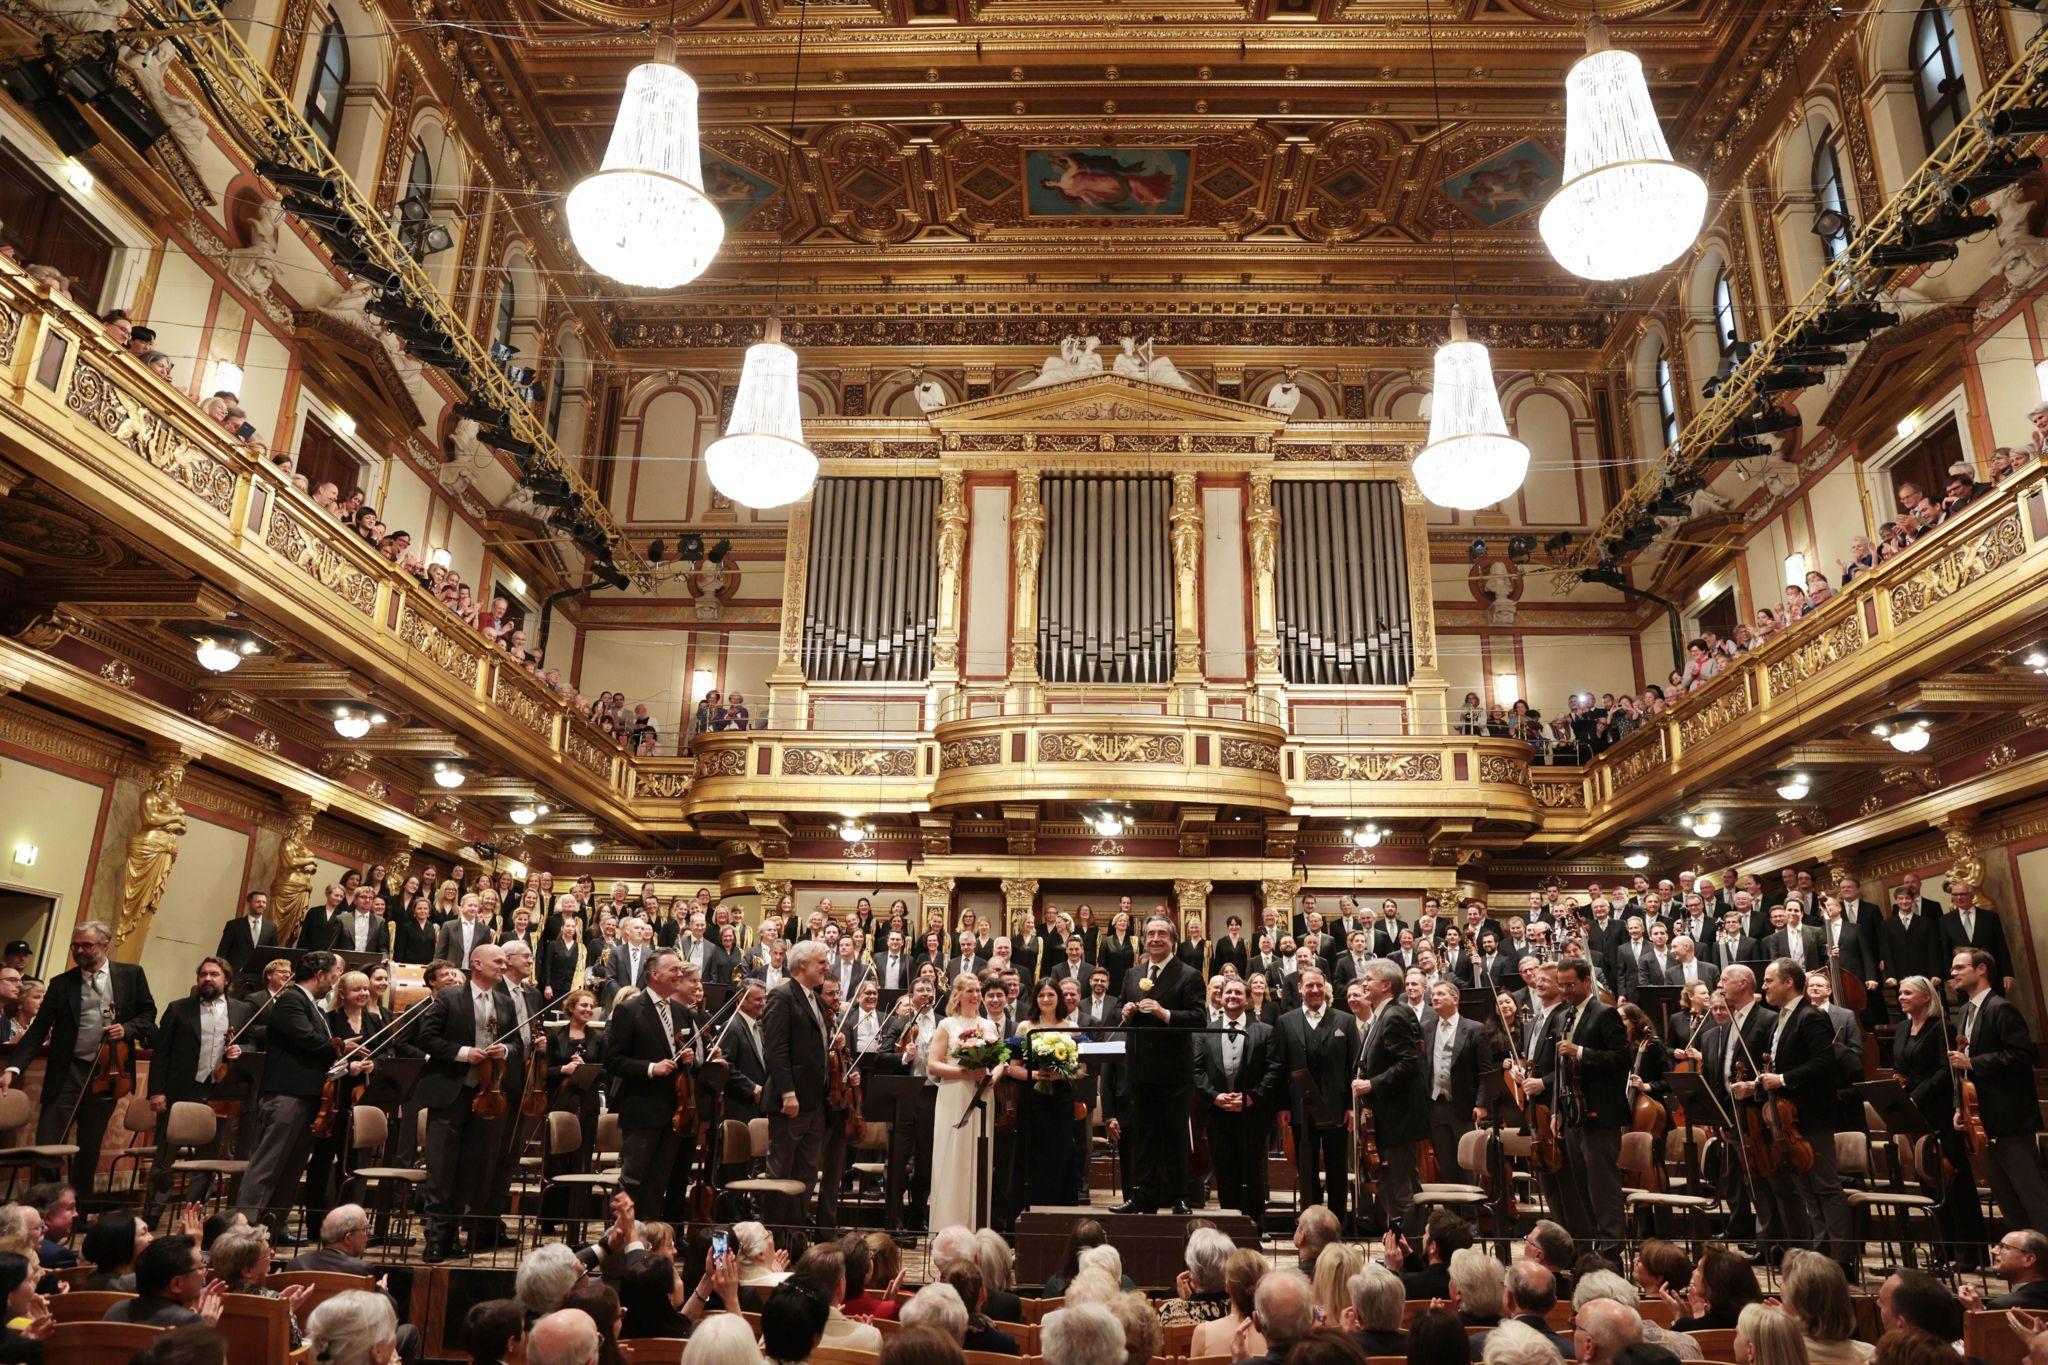 The Vienna Philharmonic Orchestra and conductor Riccardo Muti at the Musikverein concert hall